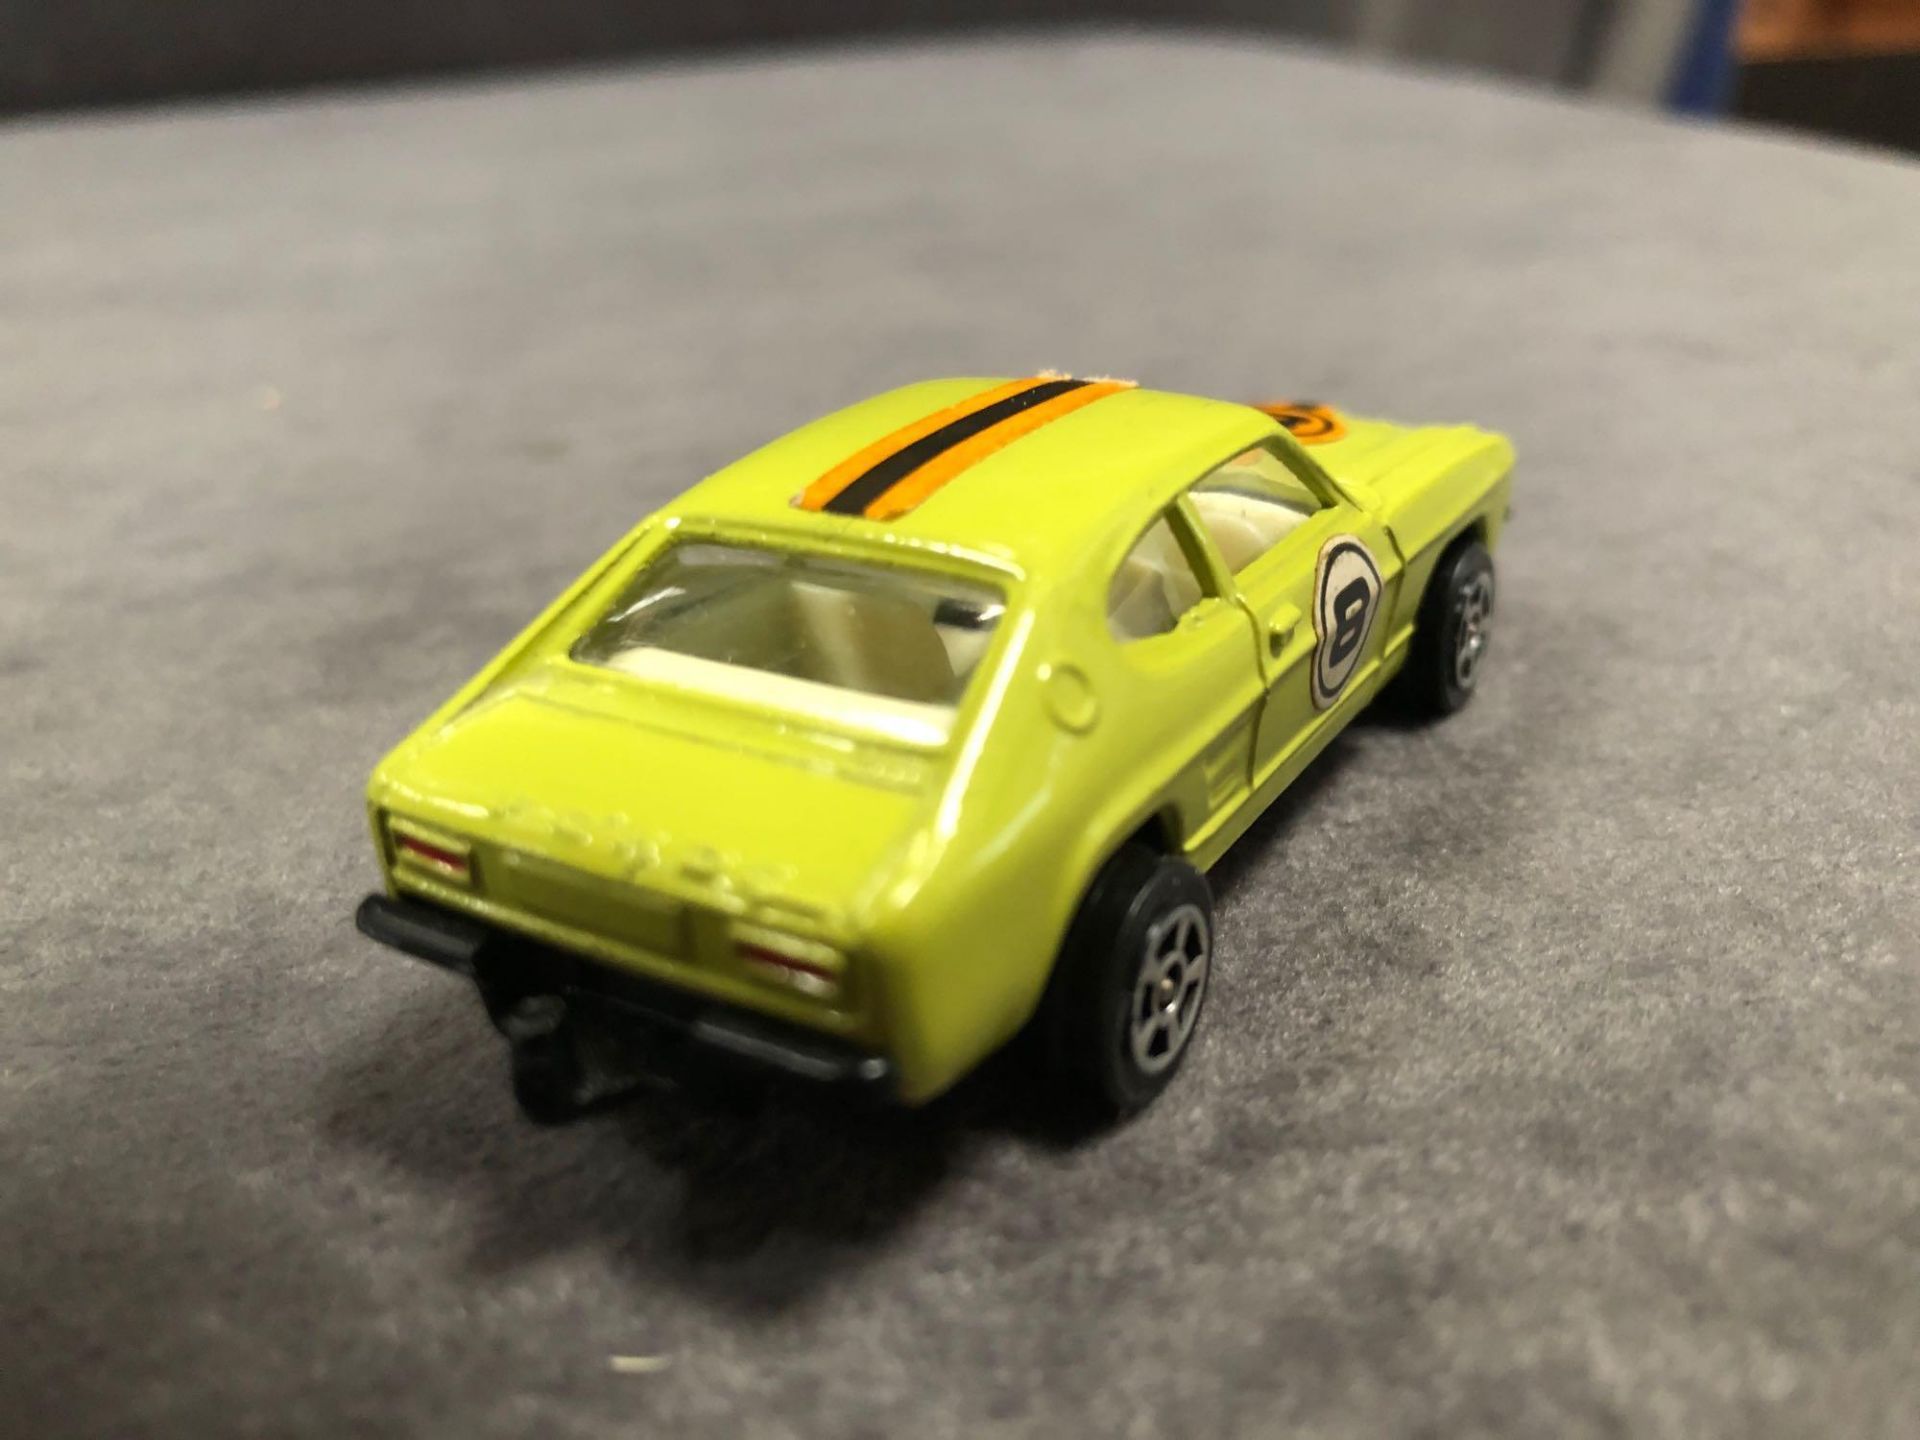 No Decal Mint Corgi Rockets Diecast #D922 Ford Capri In Lime Green In 'Code 2' Manufactured Box - Image 3 of 3